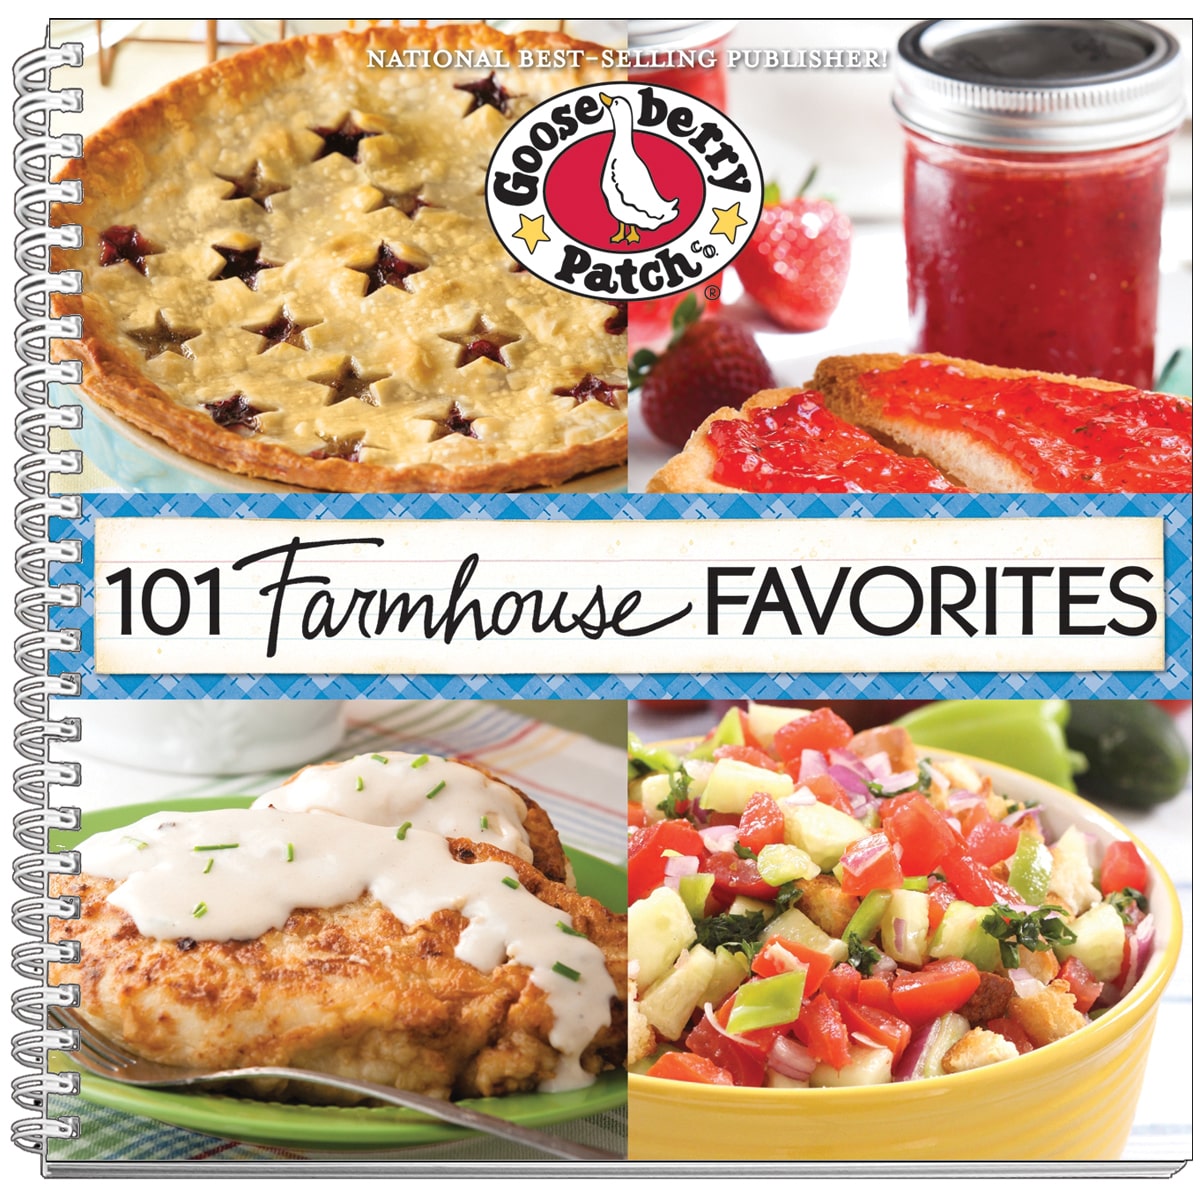 101 Farmhouse Favorites (Hardcover) by Gooseberry Patch - image 2 of 2